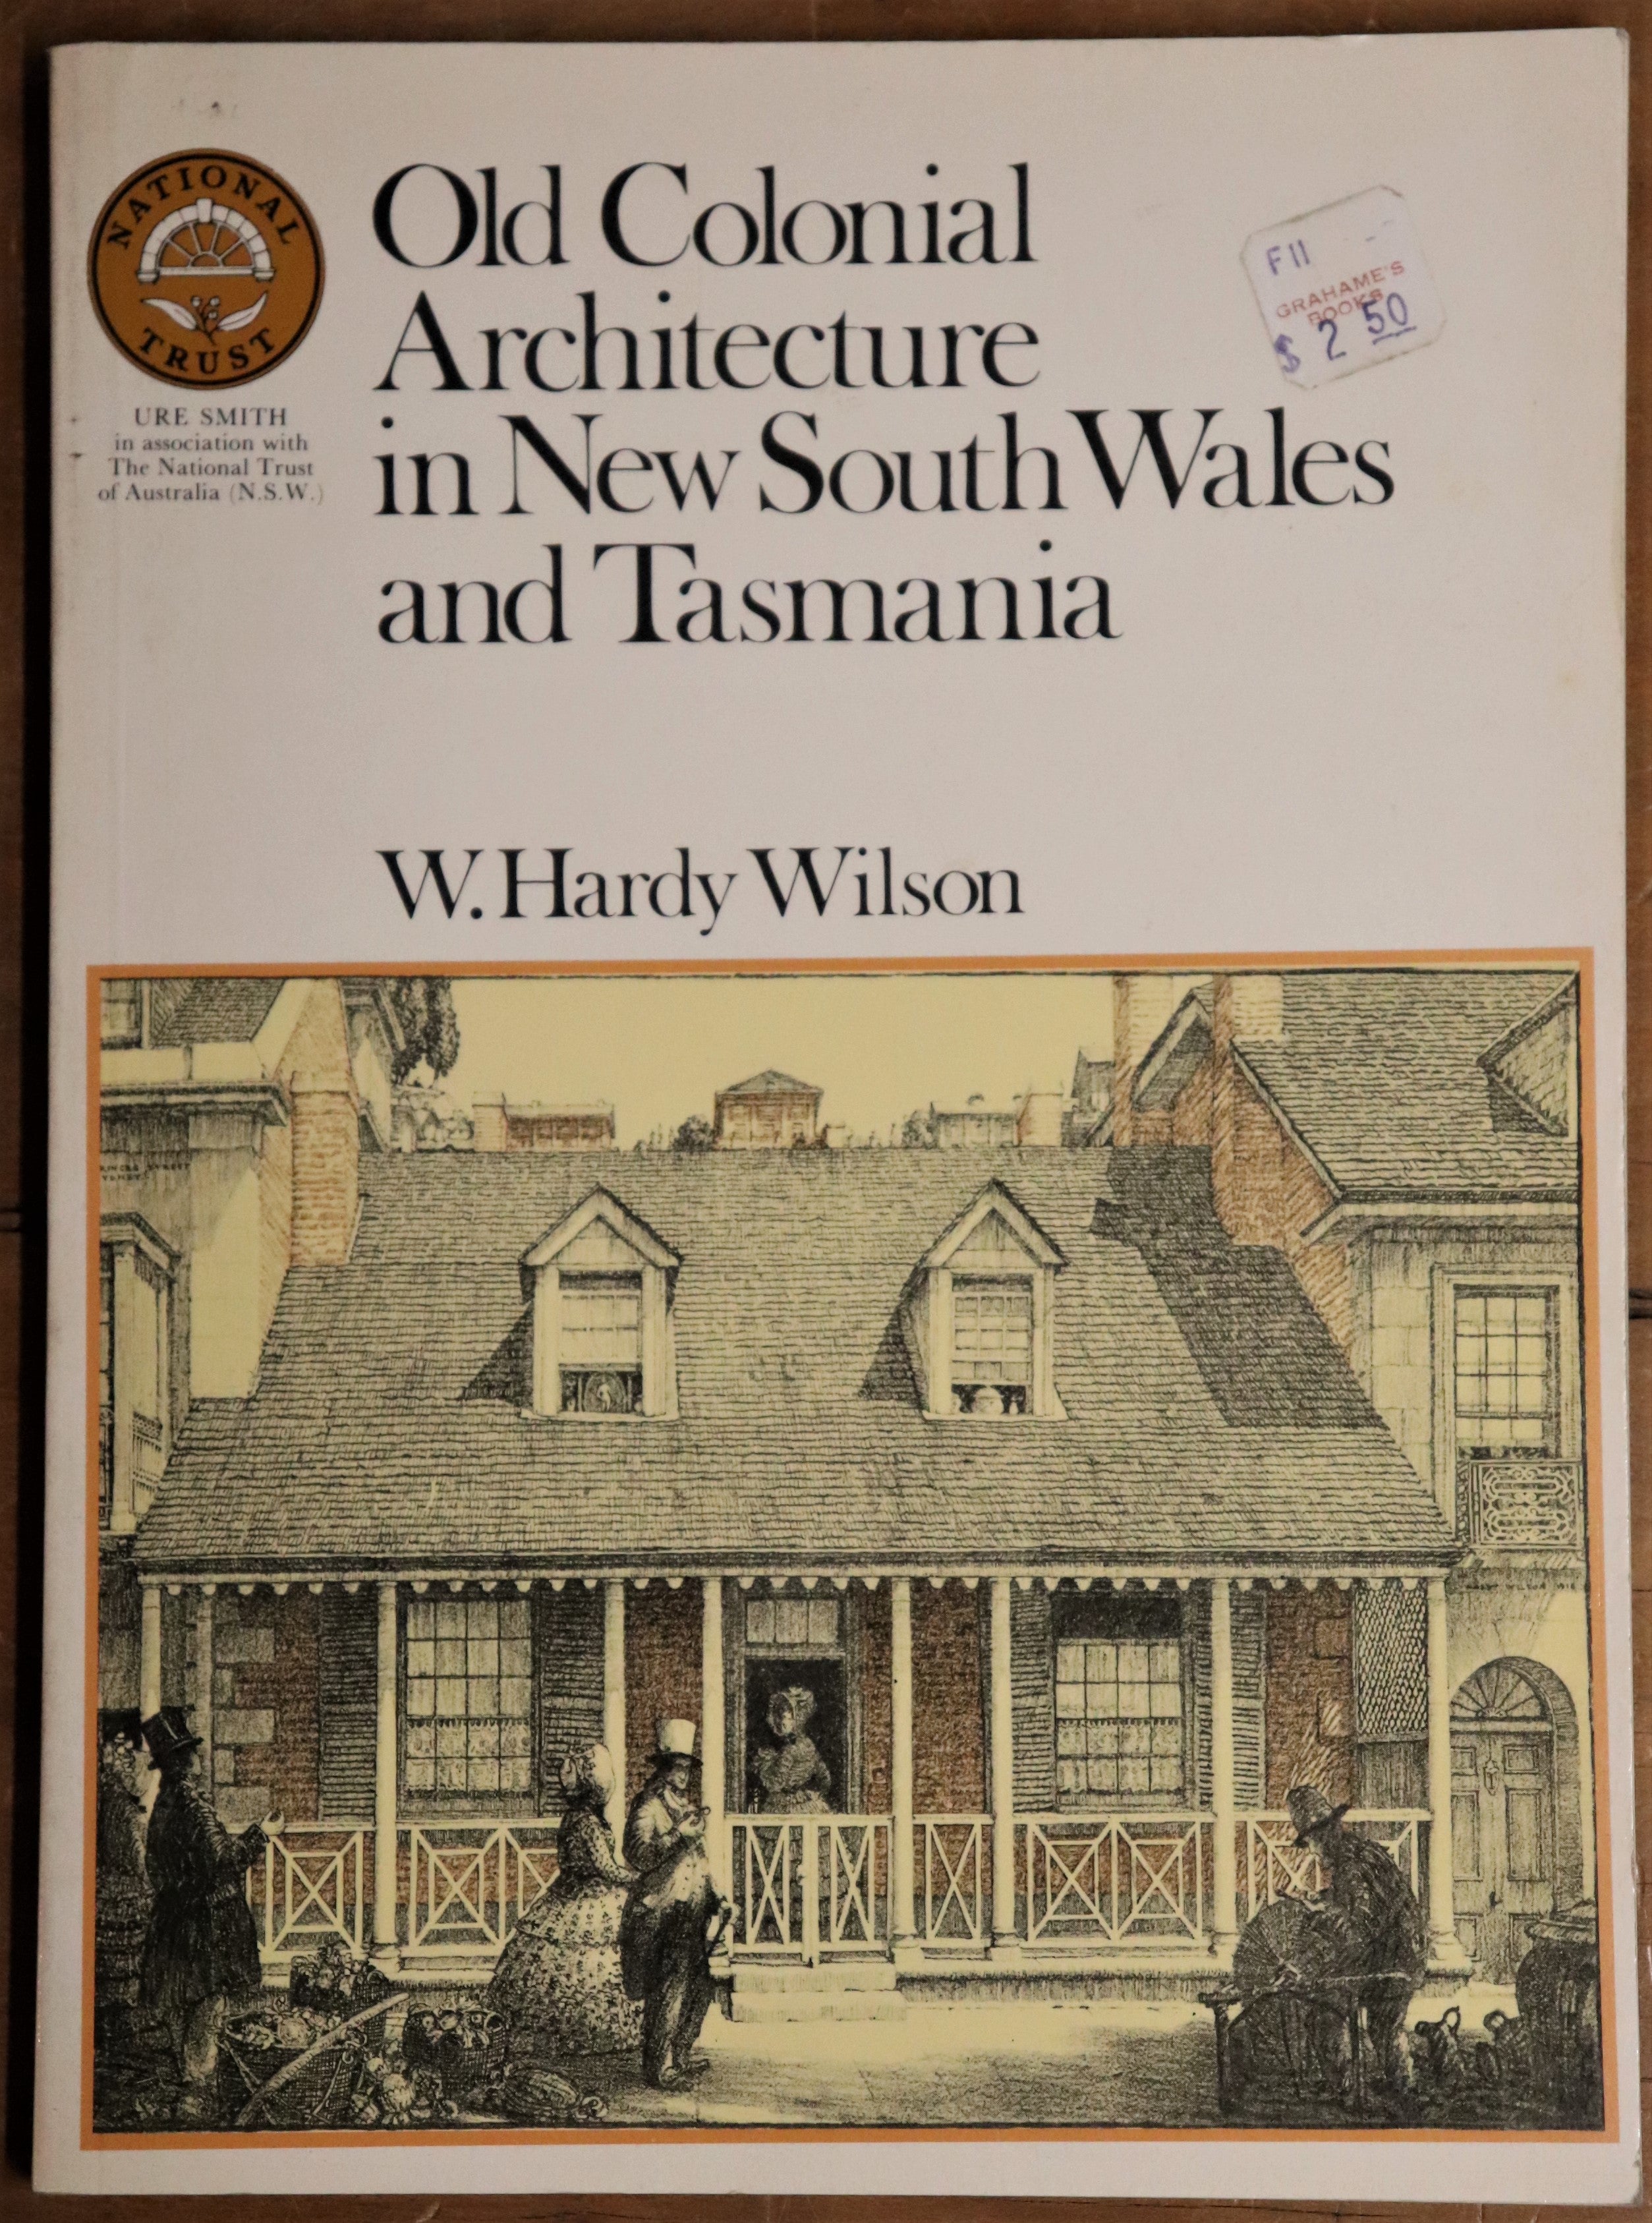 Old Colonial Architecture in New South Wales and Tasmania - 1975 History Book